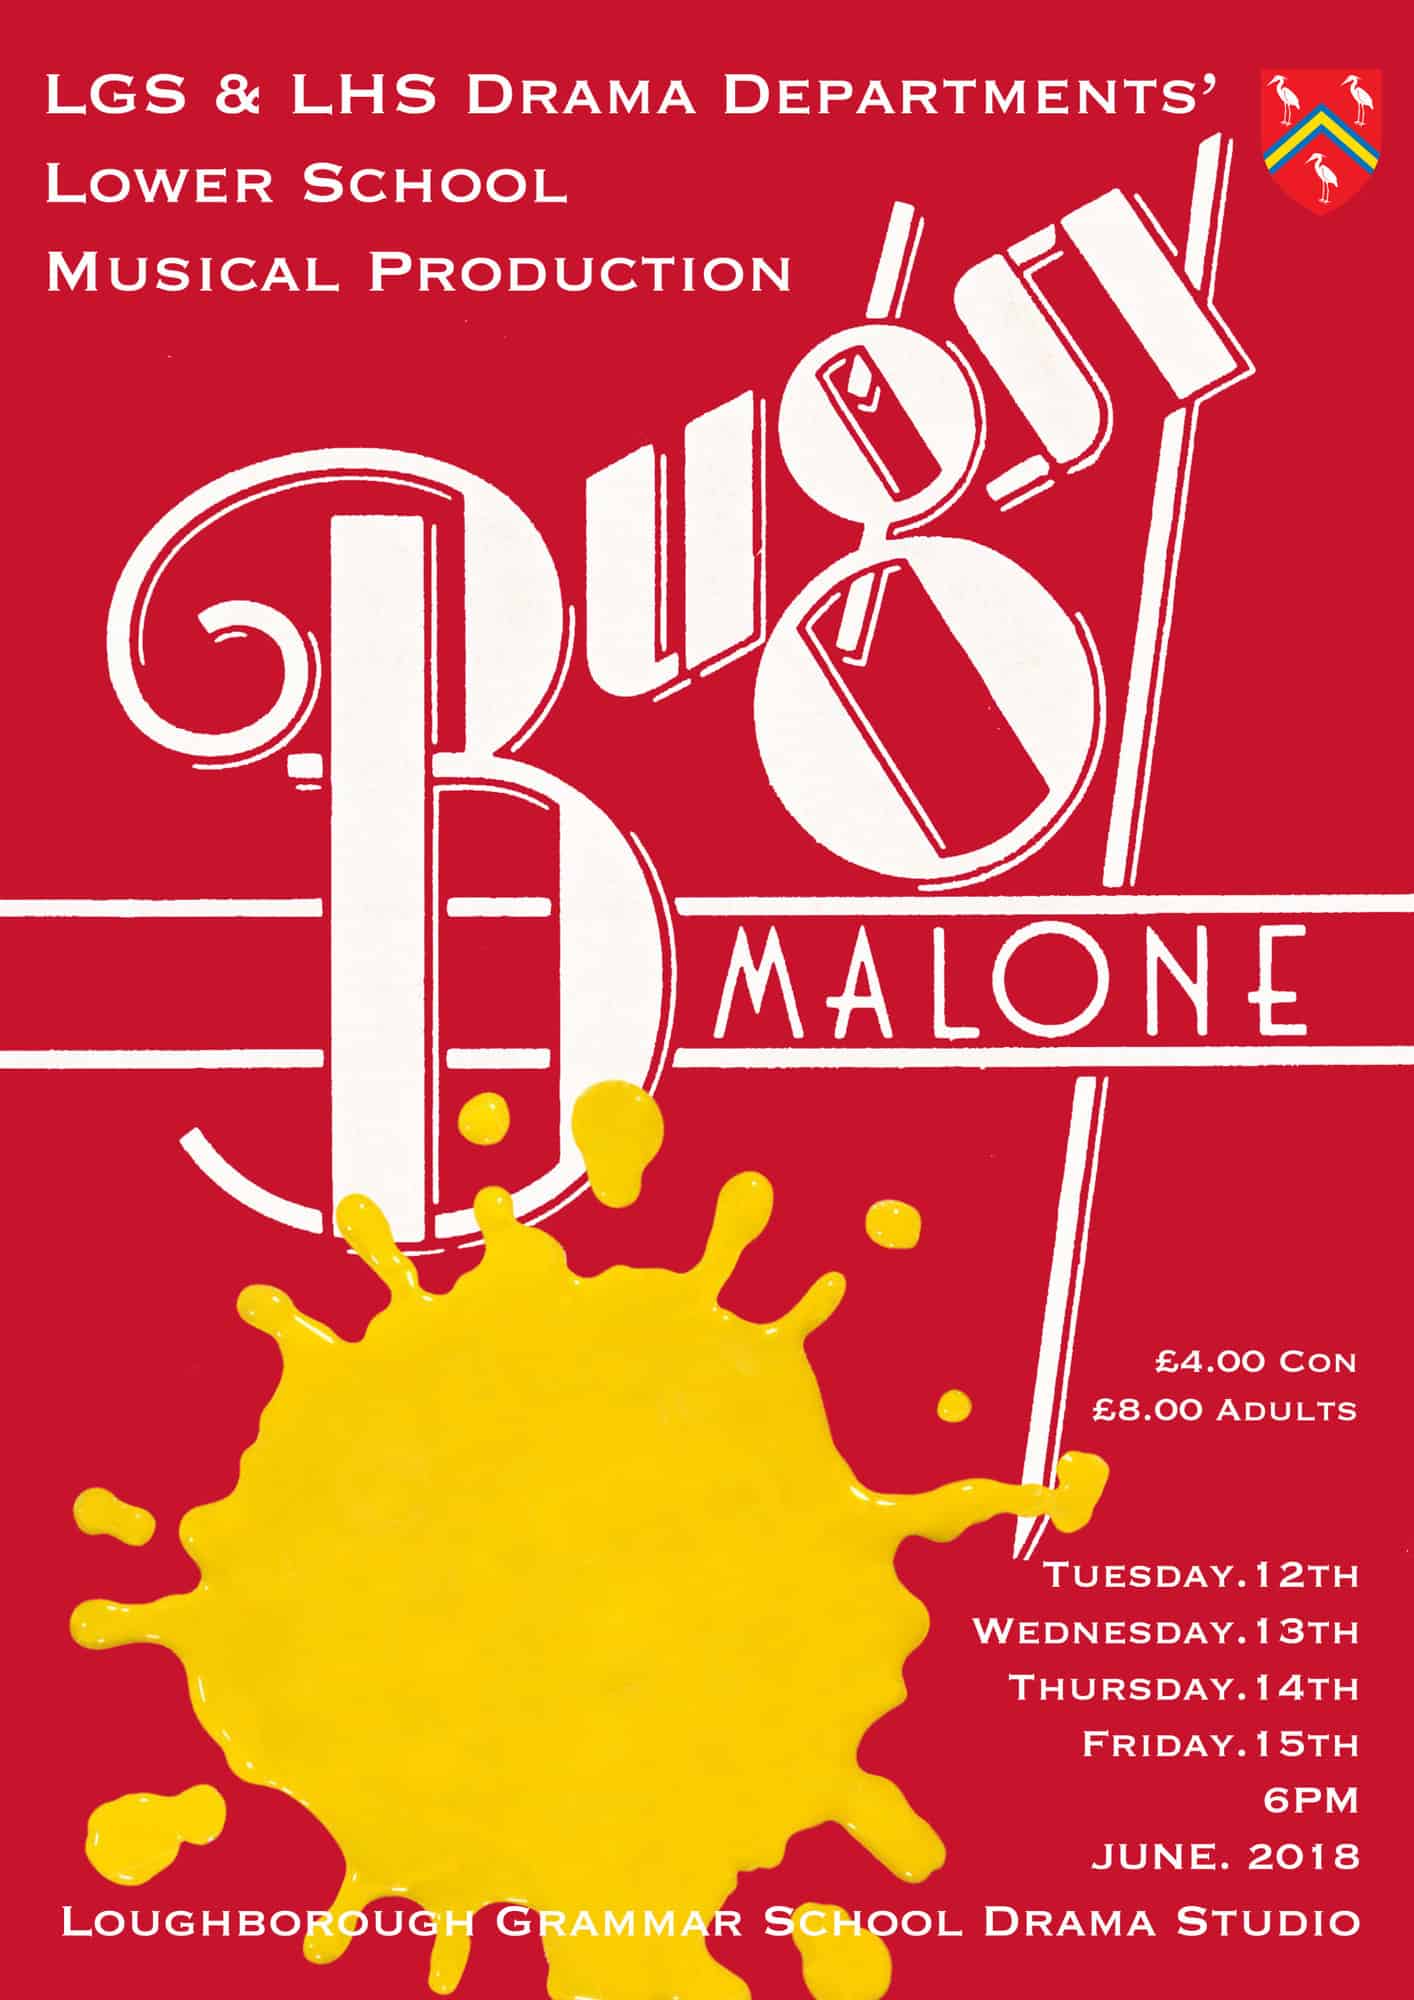 Bugsy Malone – Get your tickets here! featured image